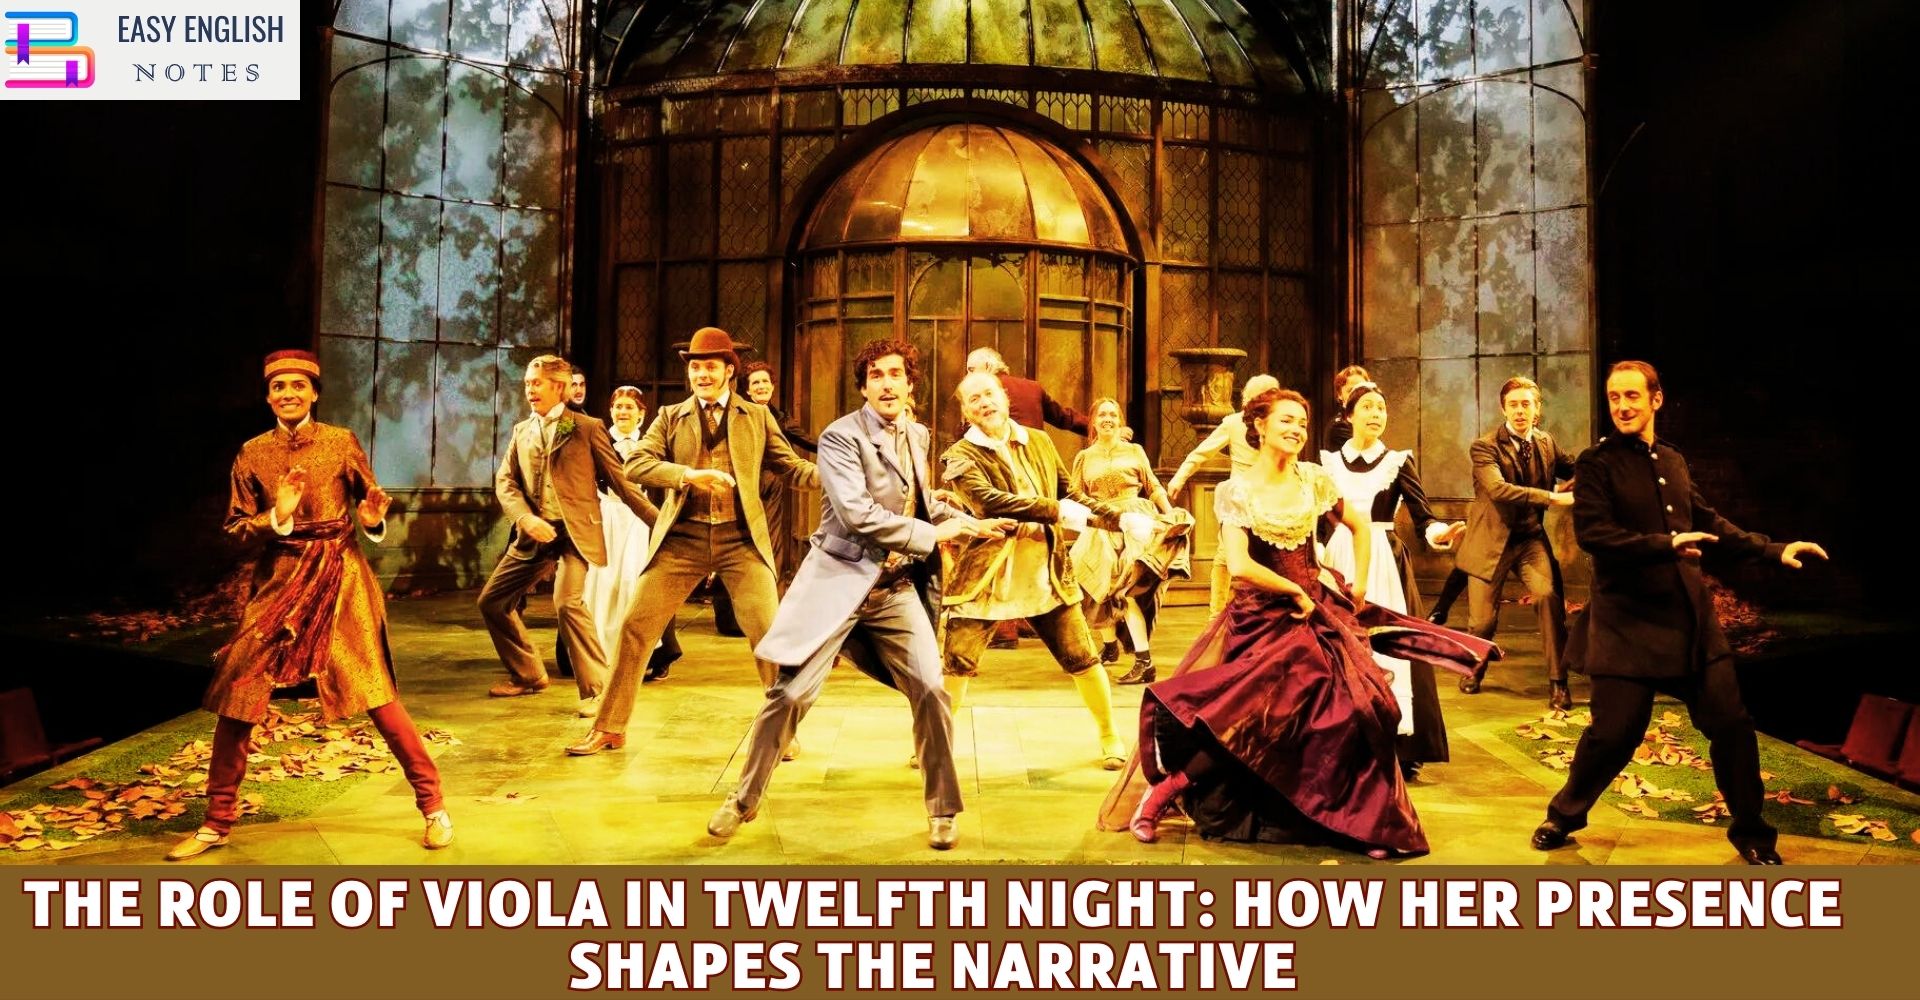 The Role of Viola in Twelfth Night: How Her Presence Shapes the Narrative